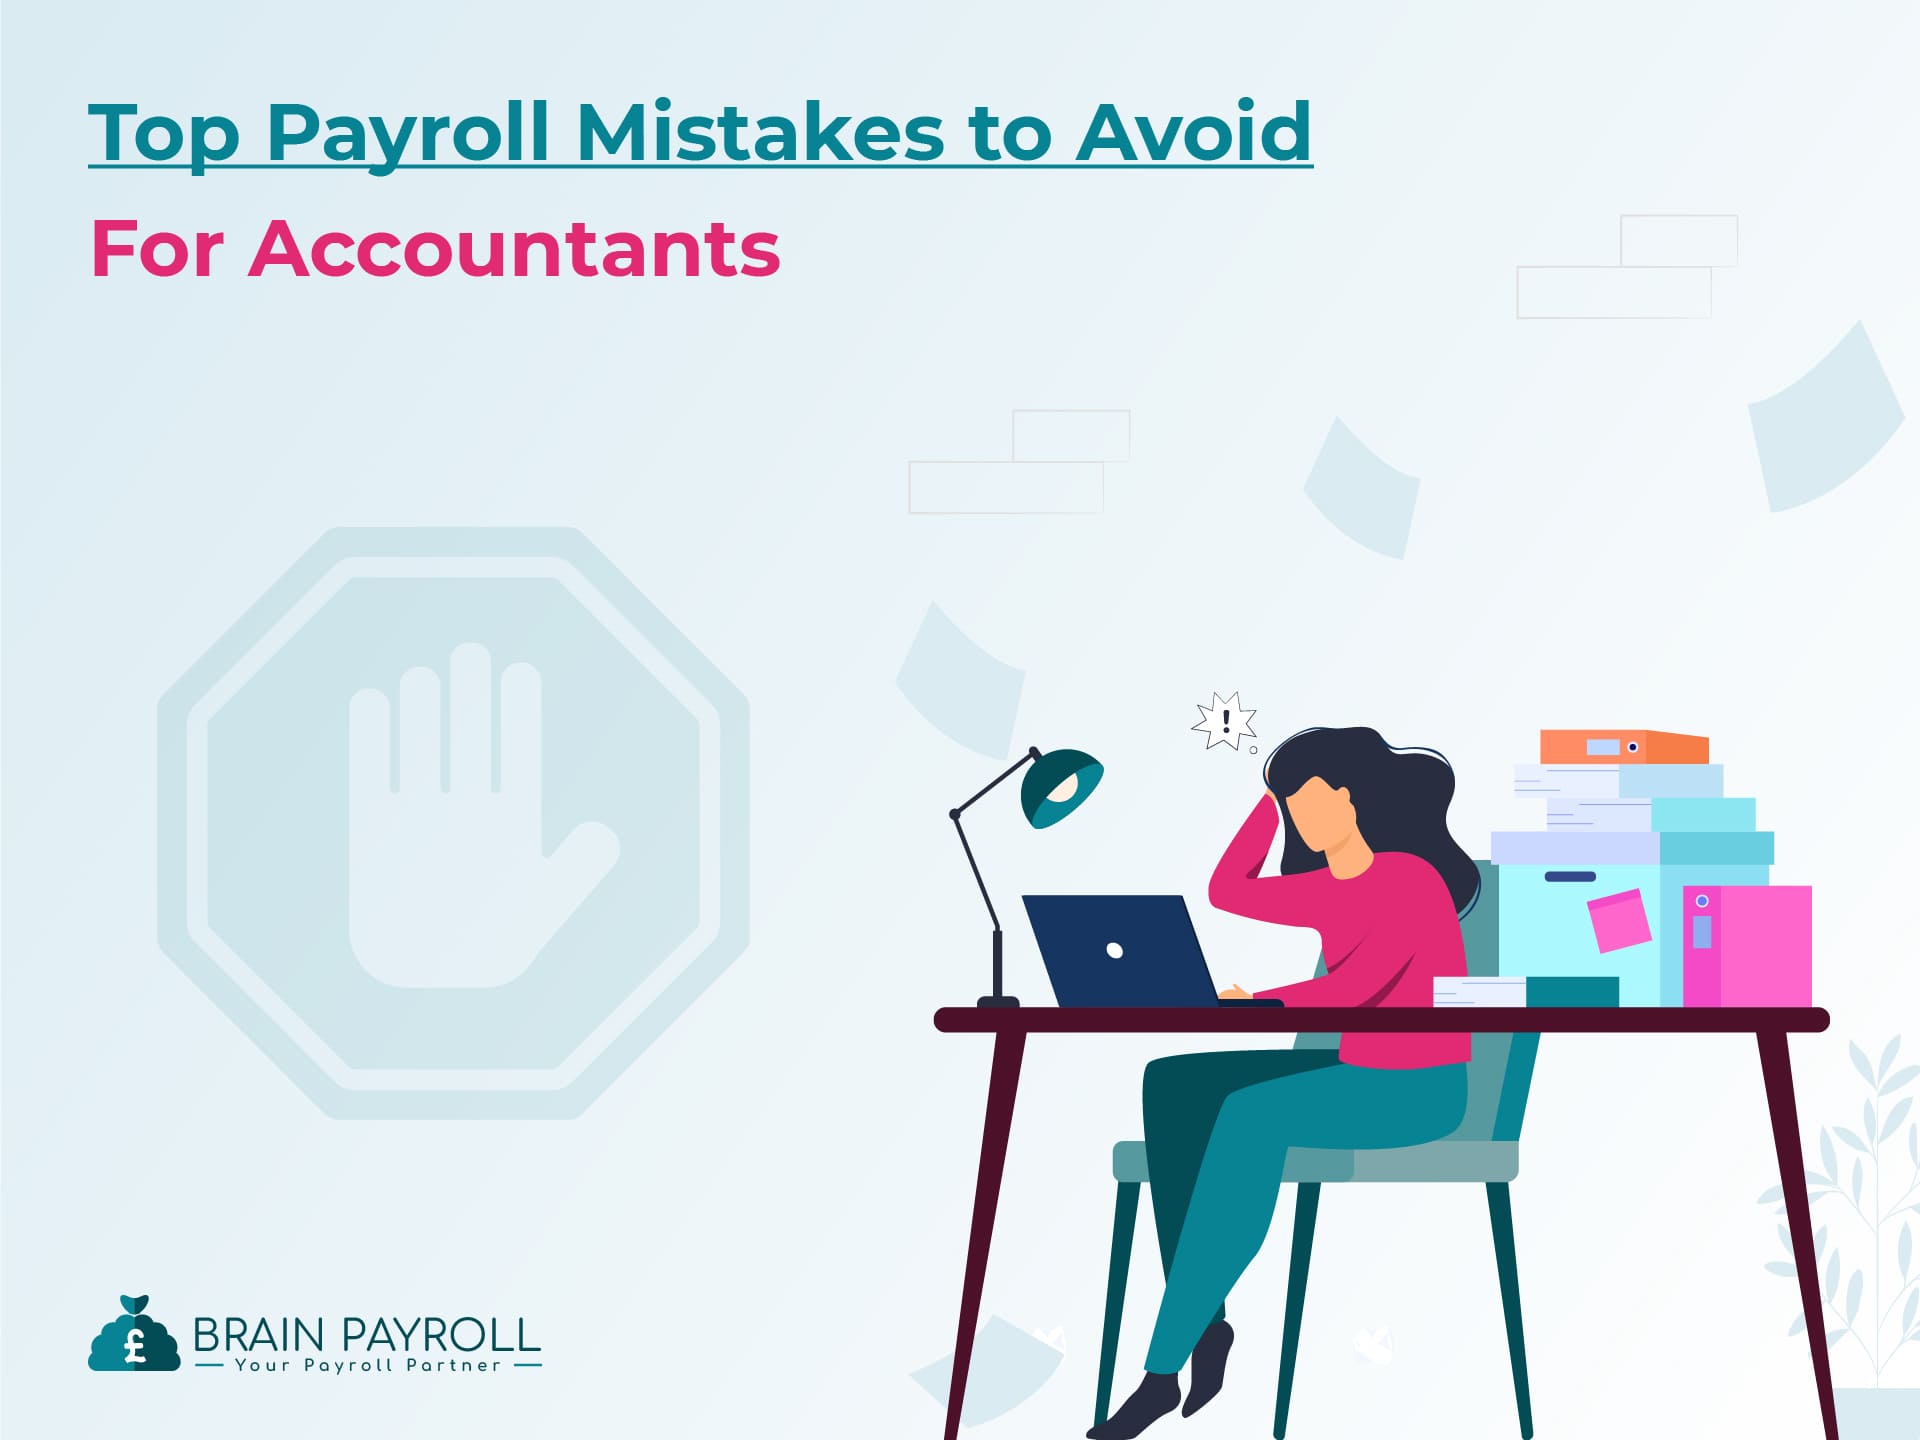 Top Payroll Mistakes to Avoid for Accountants